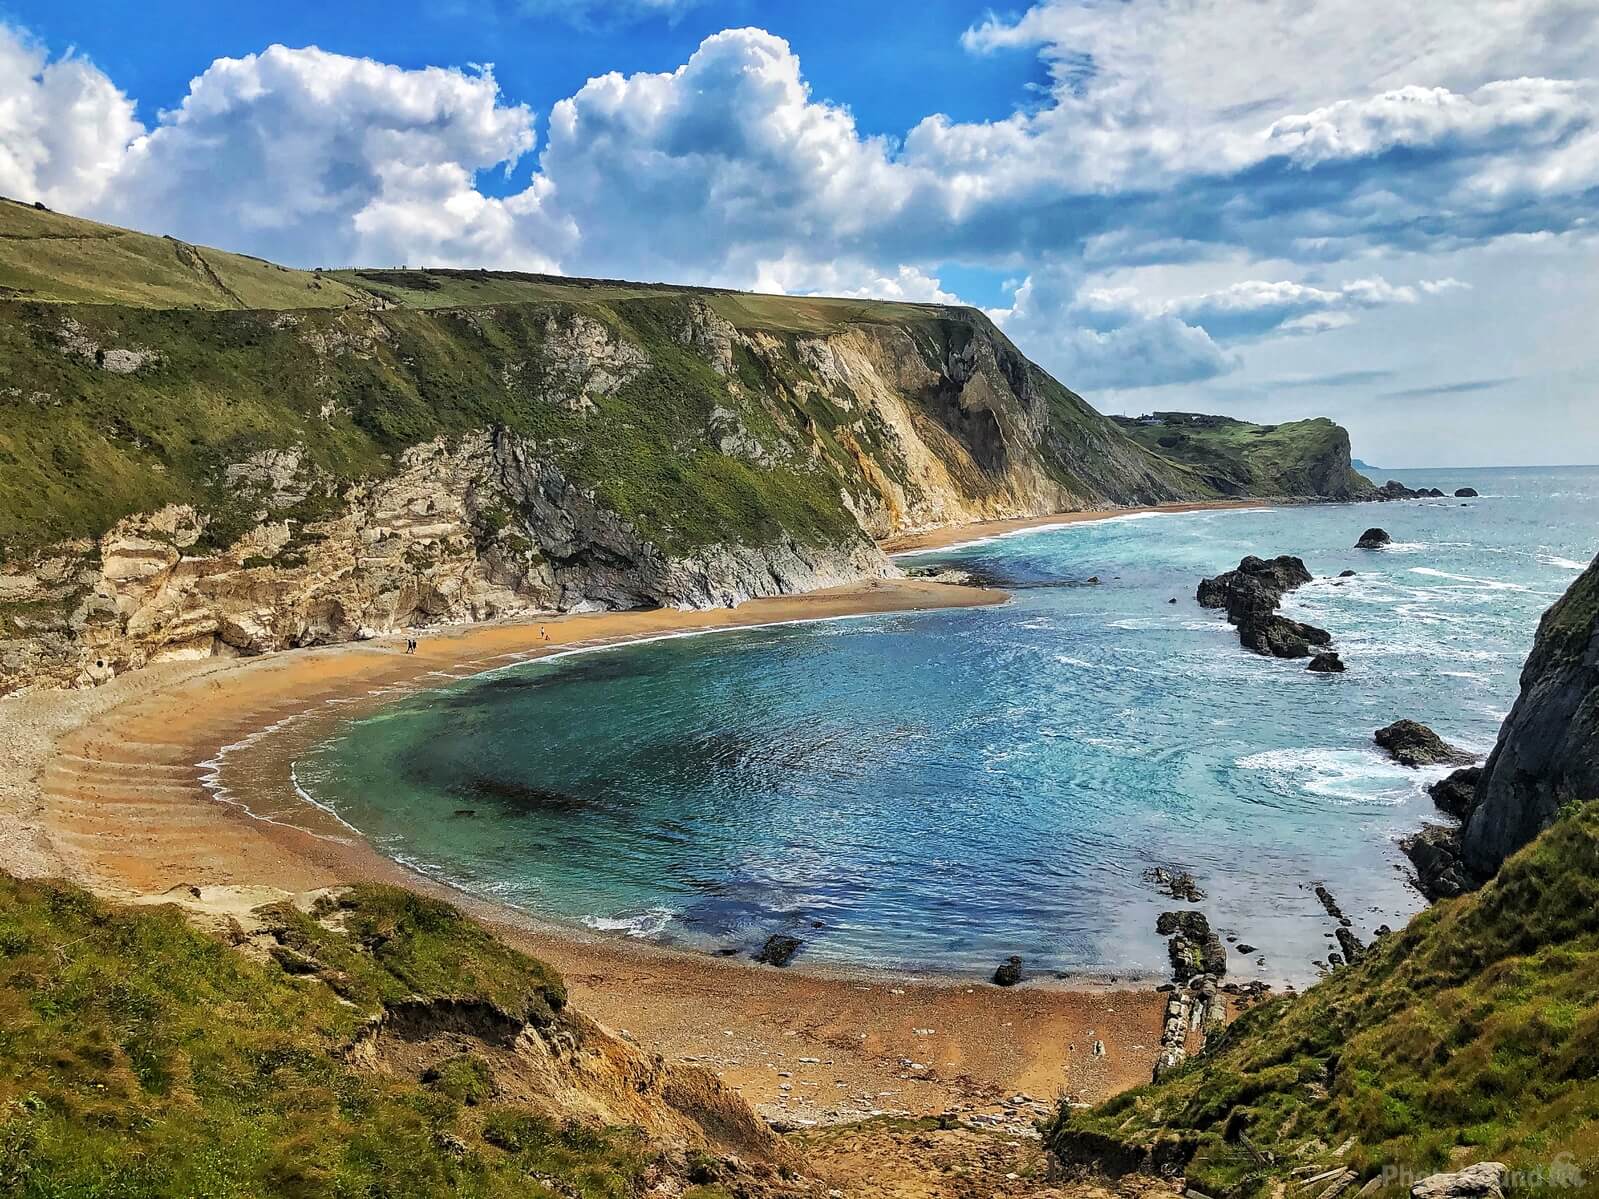 Image of Man O’ War Bay by Miles Crisell